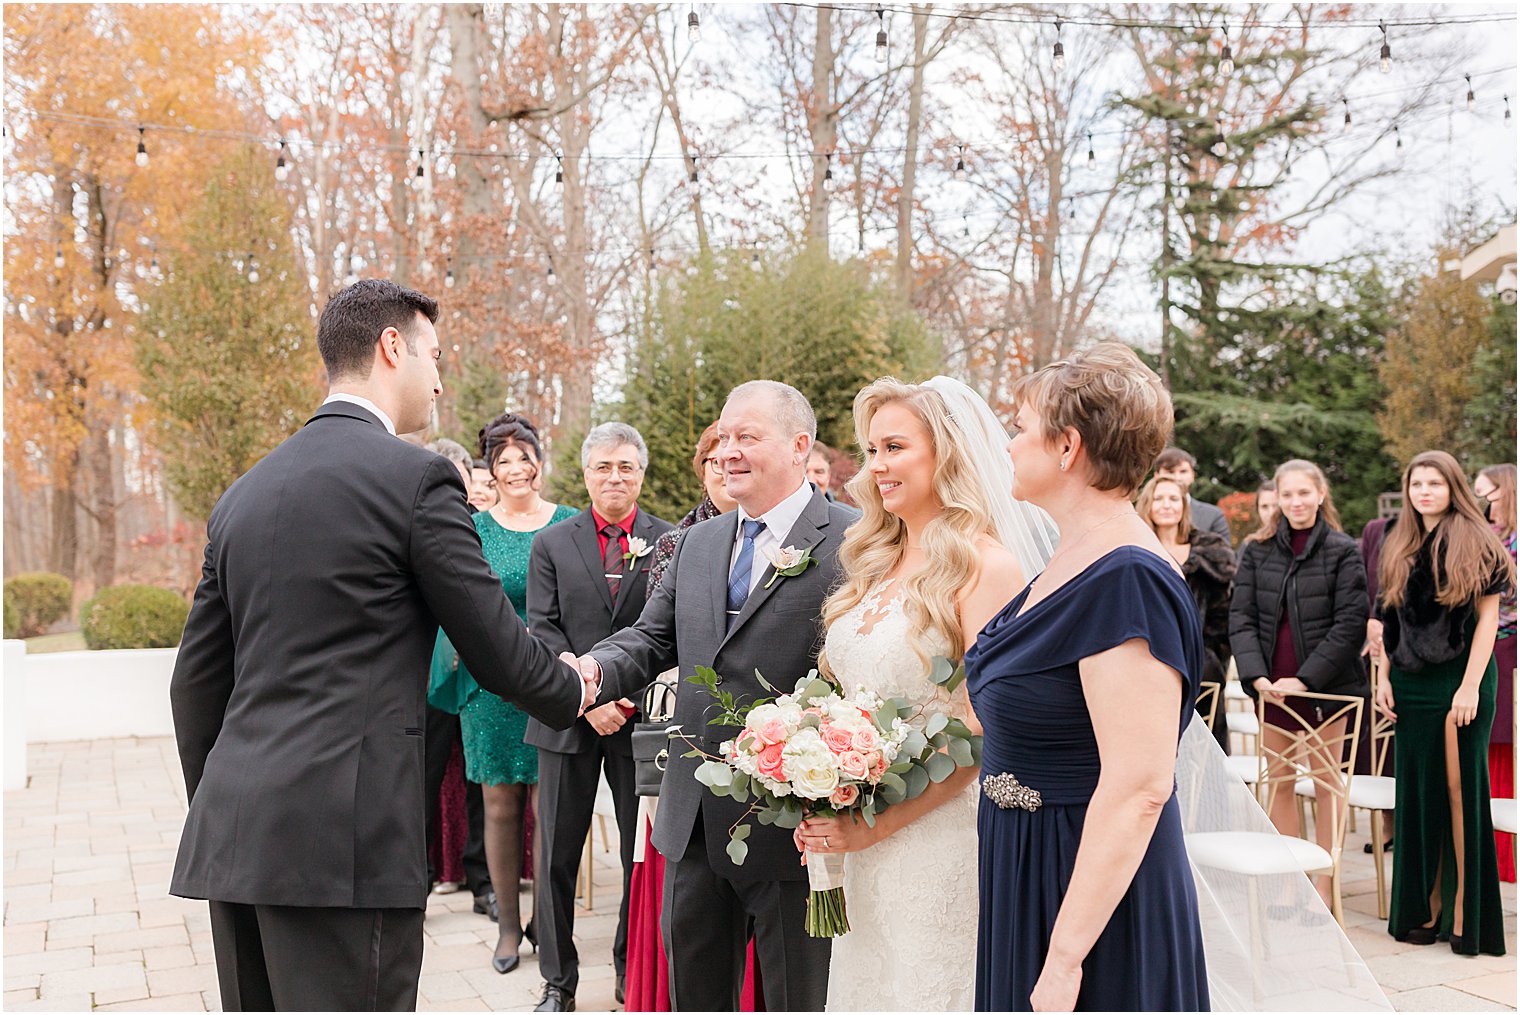 father of bride shakes groom's hand giving away bride during outdoor wedding ceremony in East Brunswick NJ